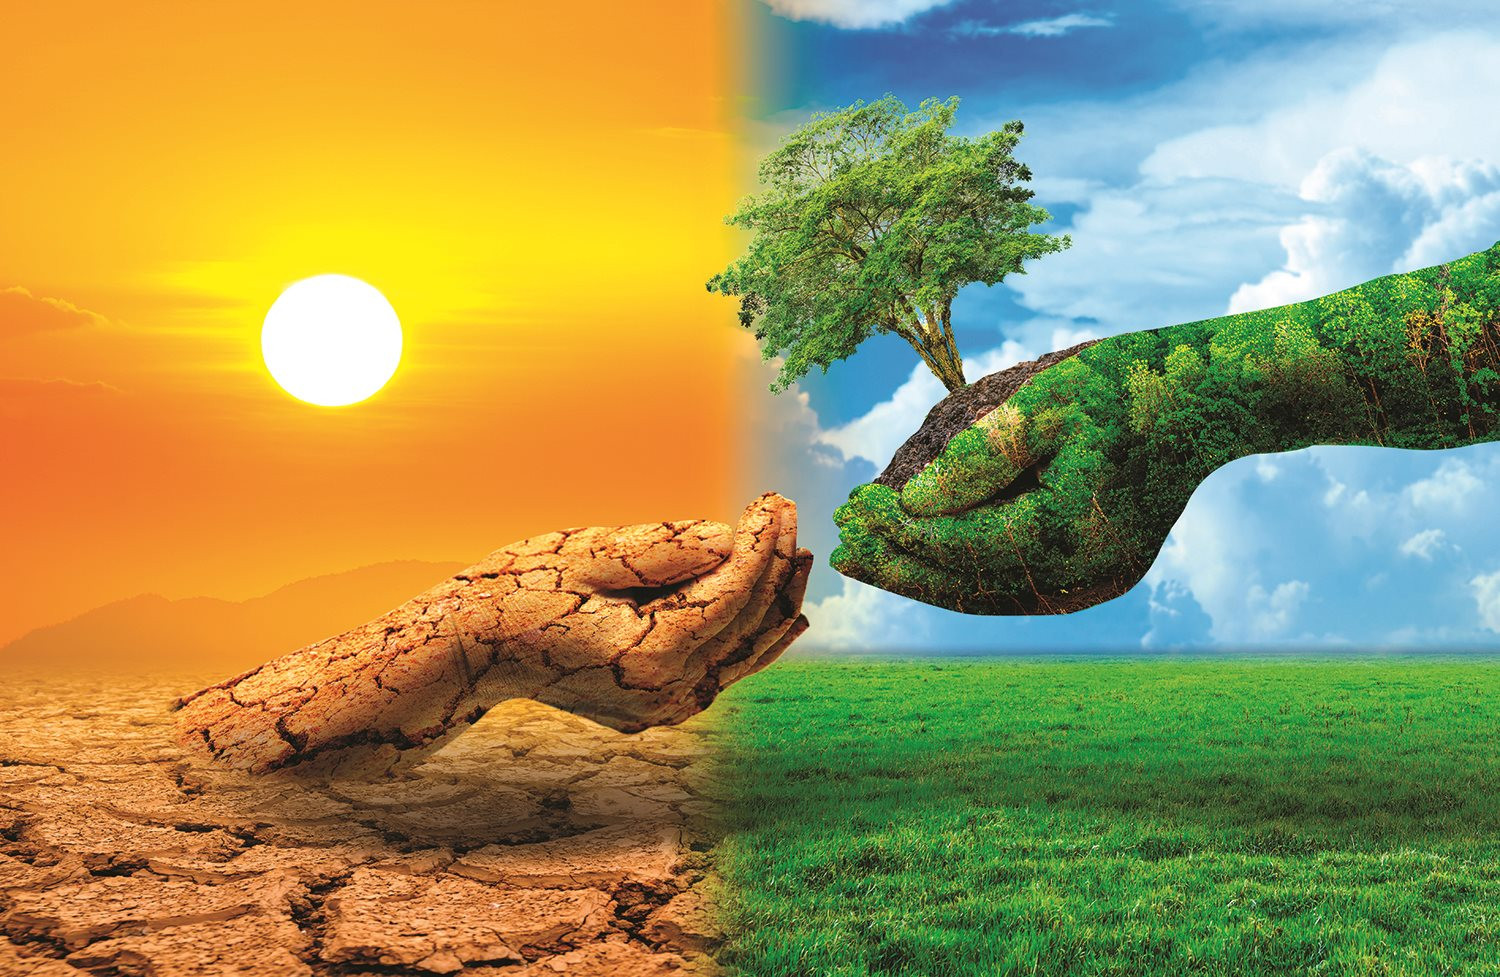 tree-two-hands-with-very-different-environments-earth-day-world-environment-day-global-warming-pollution.jpg